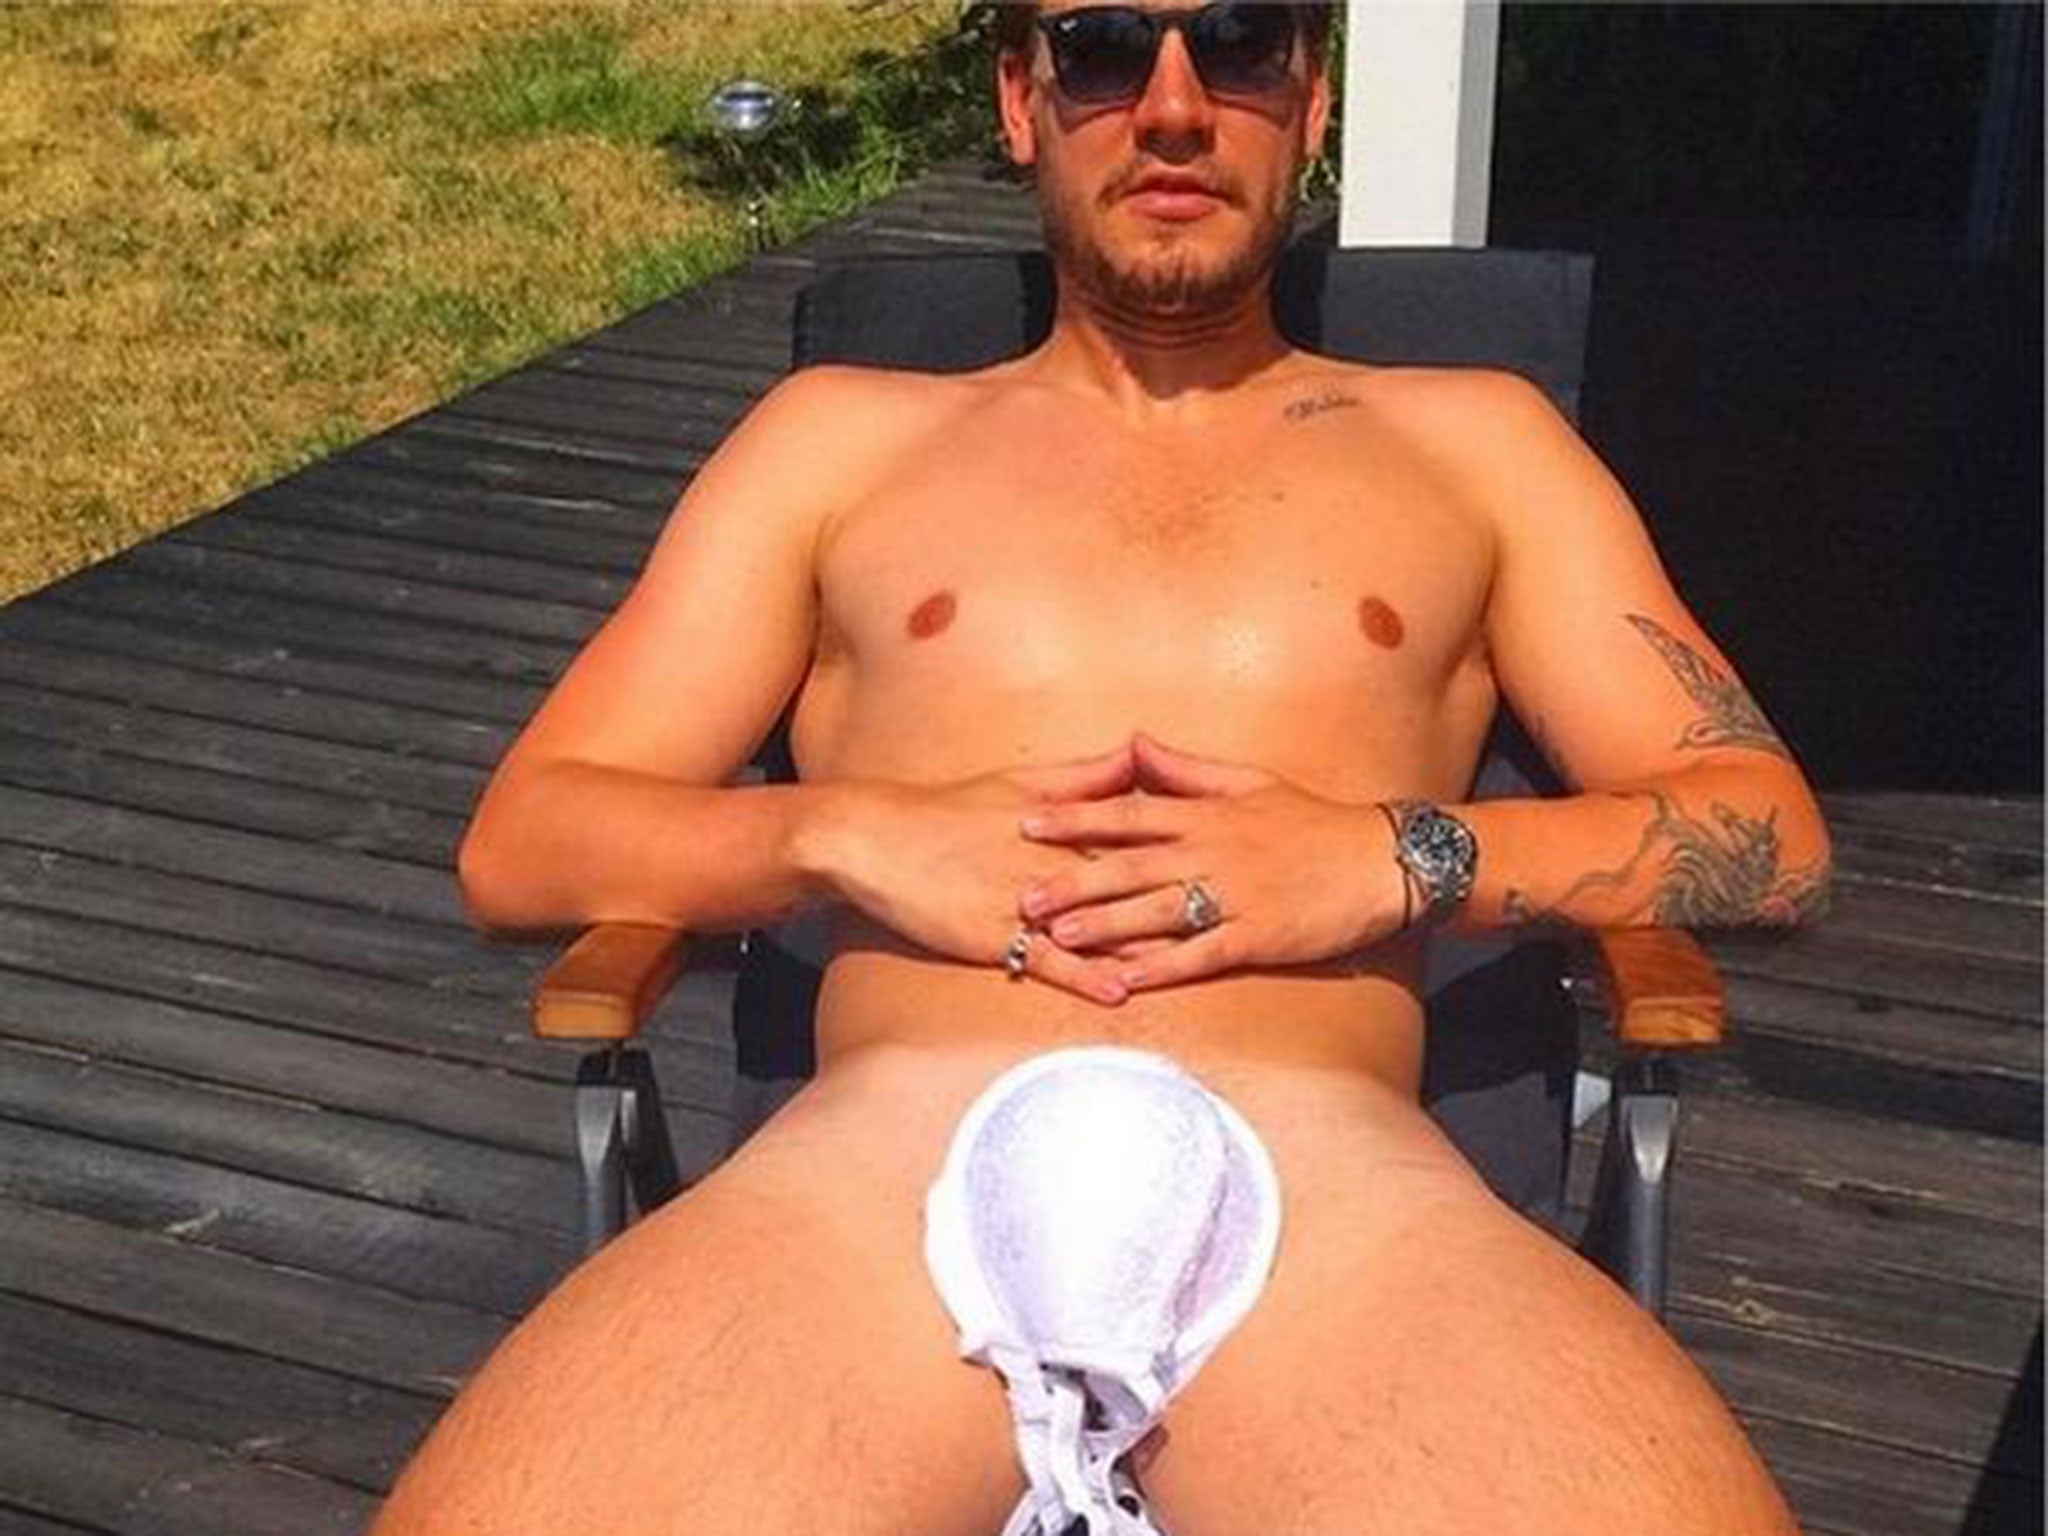 Nicklas Bendtner posted this picture with the caption "Remember to protect yourself against the sun"